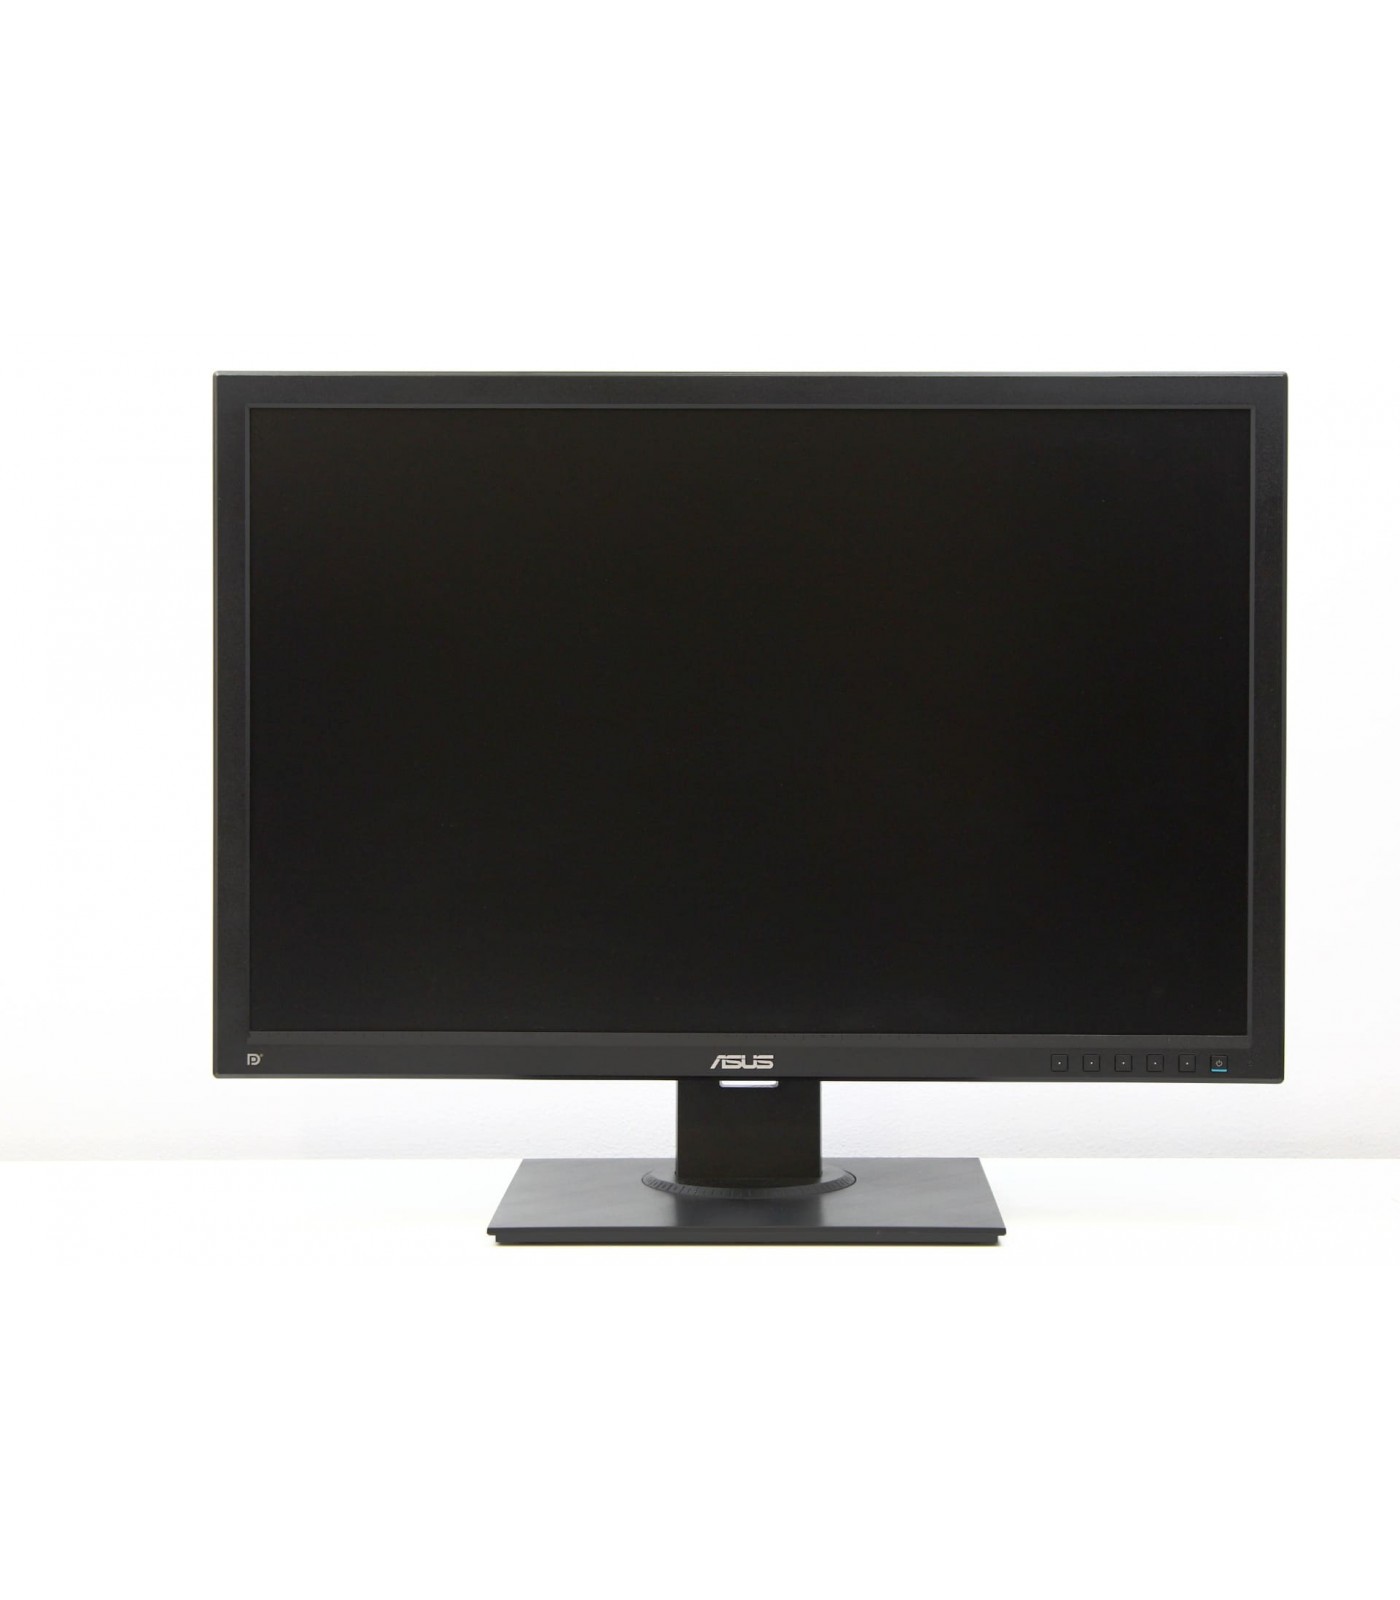 Poleasingowy monitor Asus BE24A 24" 1920x1200 px IPS Klasa A-